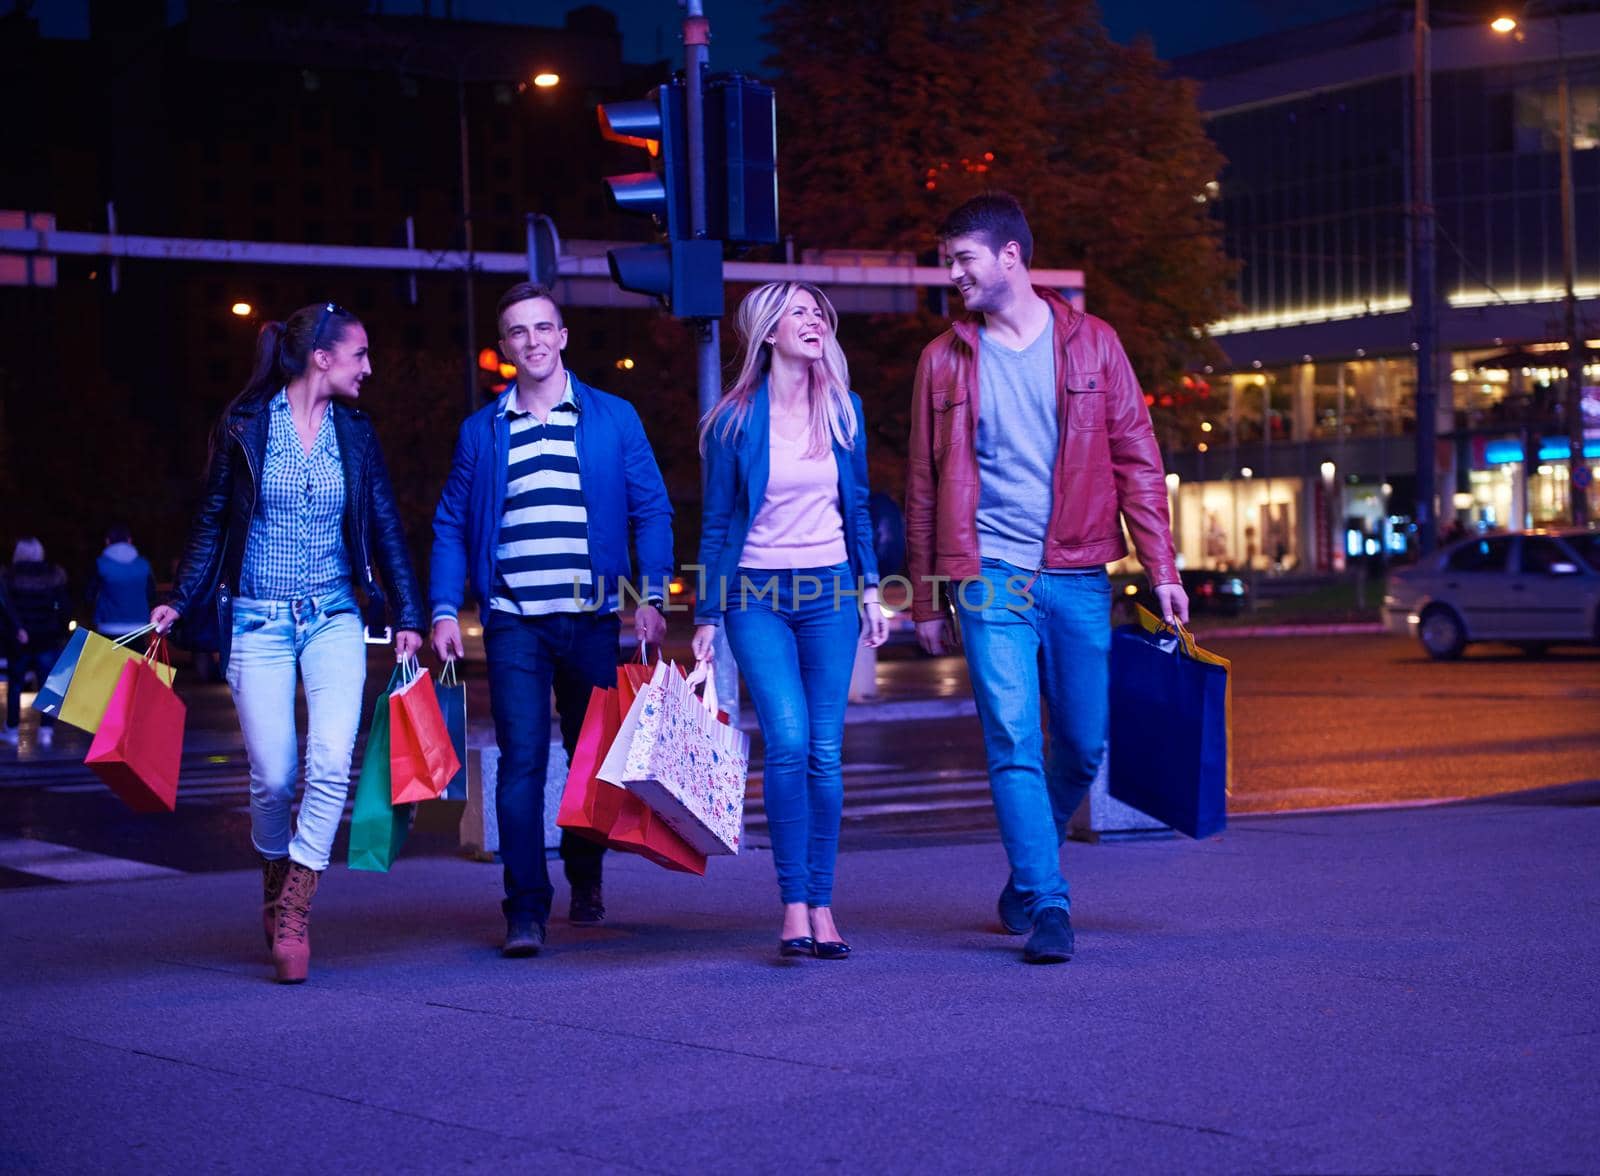 Group Of Friends Enjoying Shopping Trip Together
group of happy young frineds enjoying shopping night and walking on steet on night in with mall in background